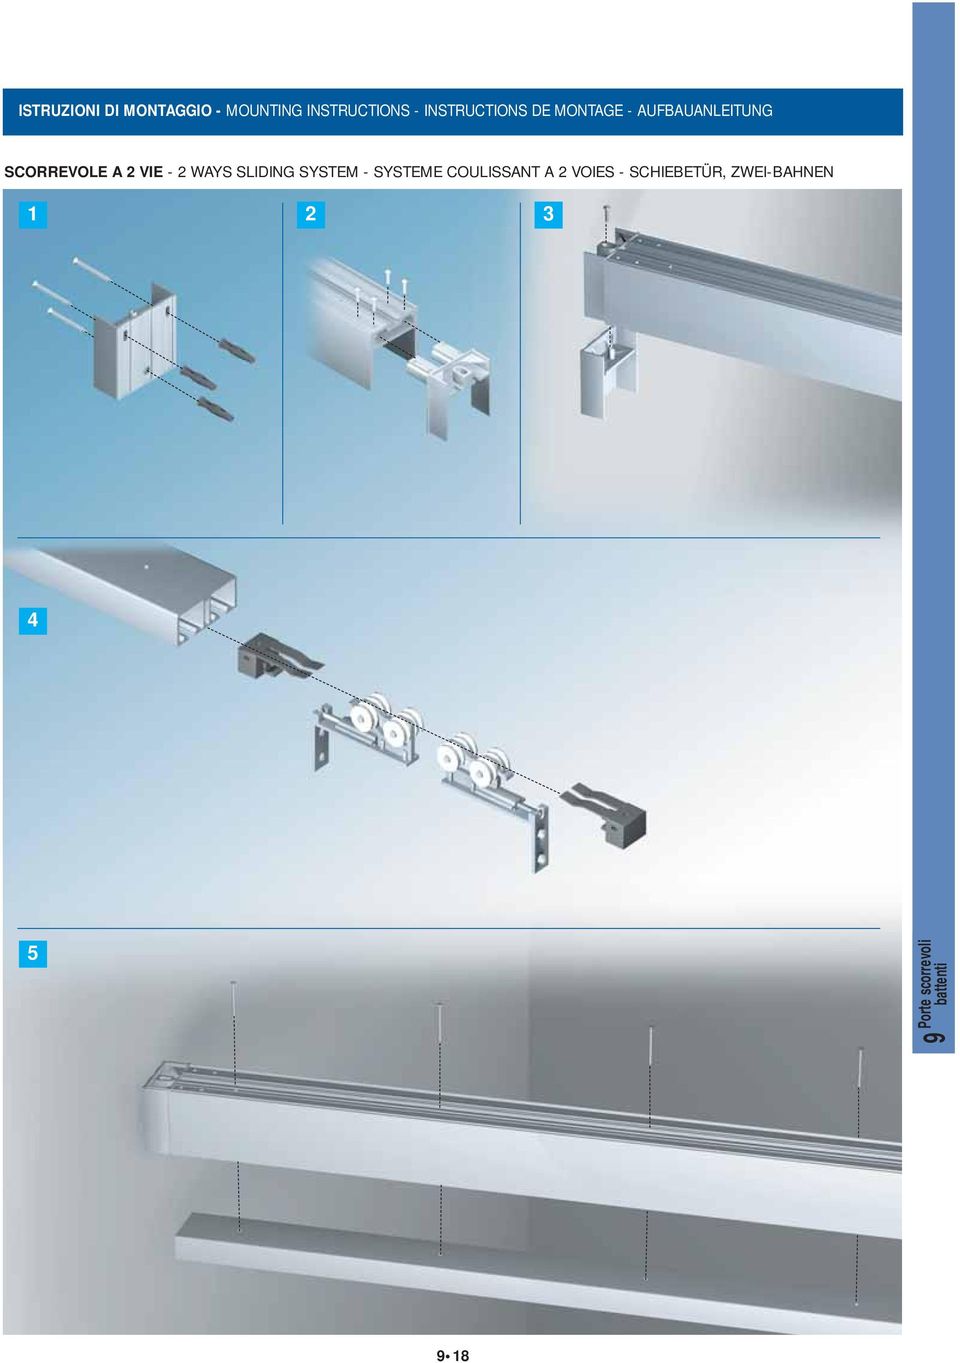 VIE - 2 WAYS SLIDING SYSTEM - SYSTEME COULISSANT A 2